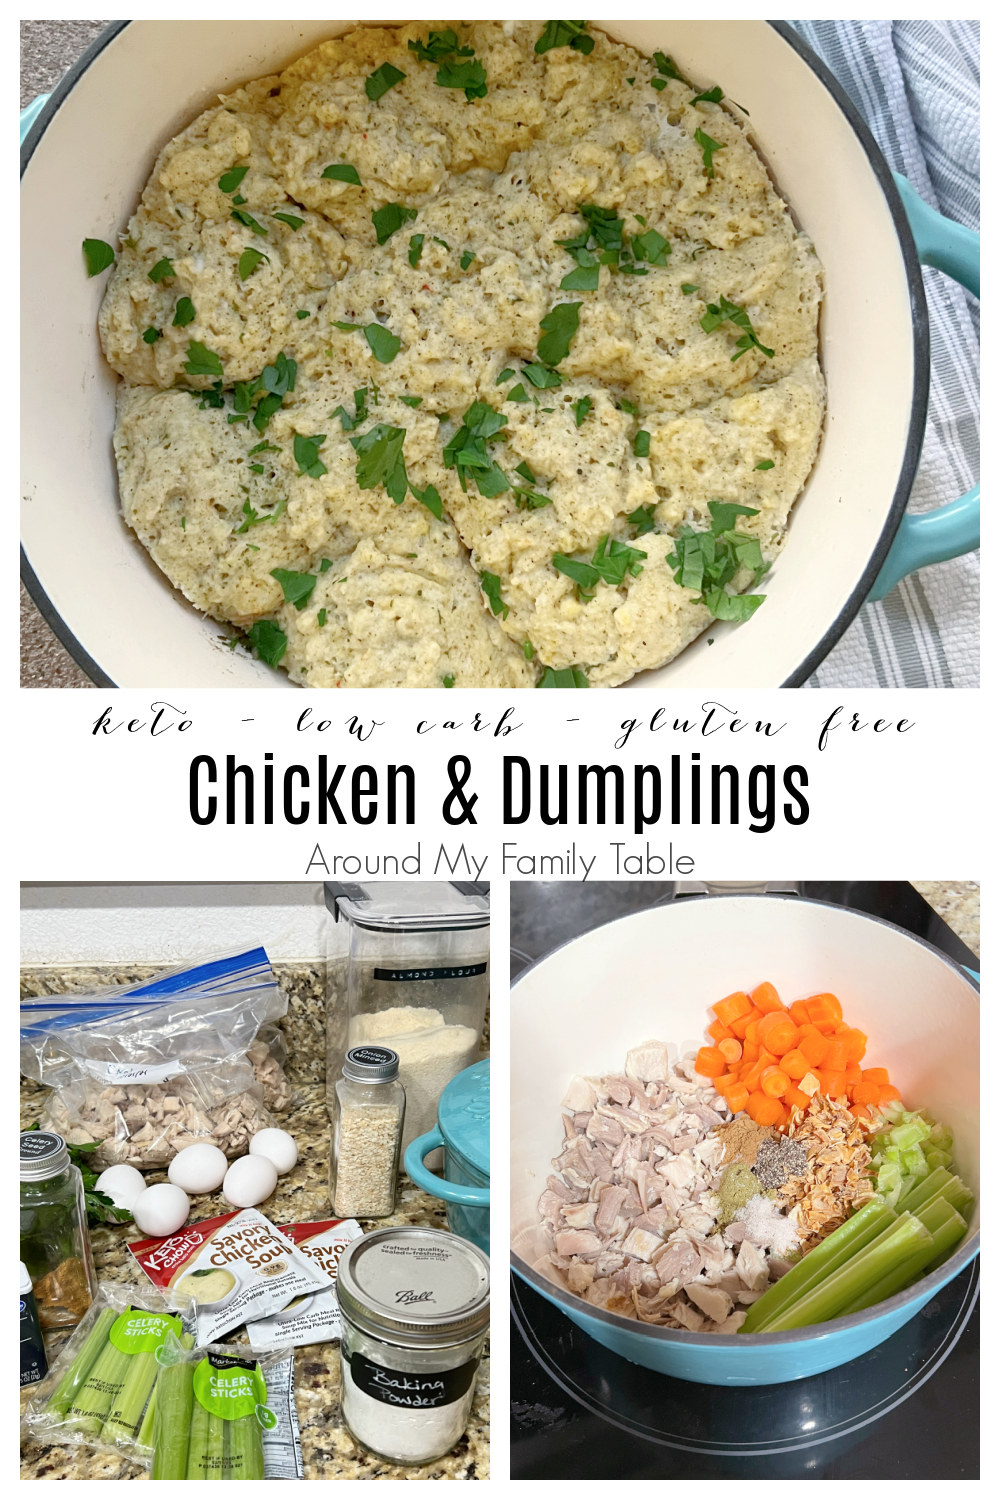 My Easy Keto Chicken and Dumplings uses leftover shredded chicken and a simple drop biscuit recipe for a no fuss supper the whole family will love. via @slingmama